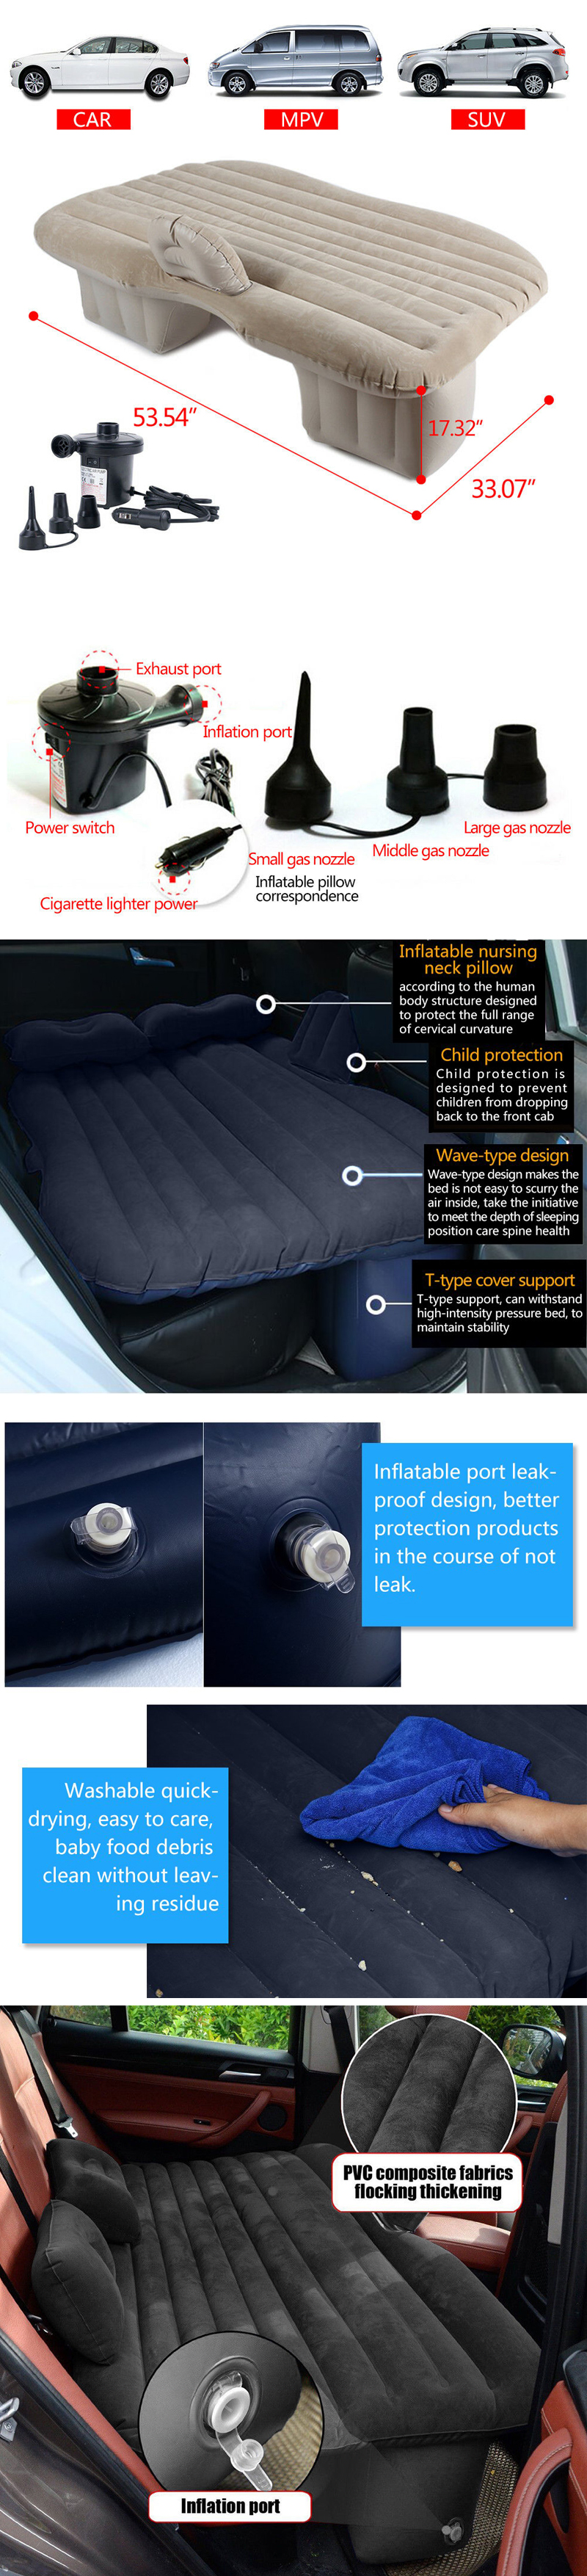 136x84x44cm-Inflatable-Air-Mattresses-Camping-Travel-Car-Back-Seat-Rear-Seat-Rest-Cushion-Sleeping-P-1556029-1